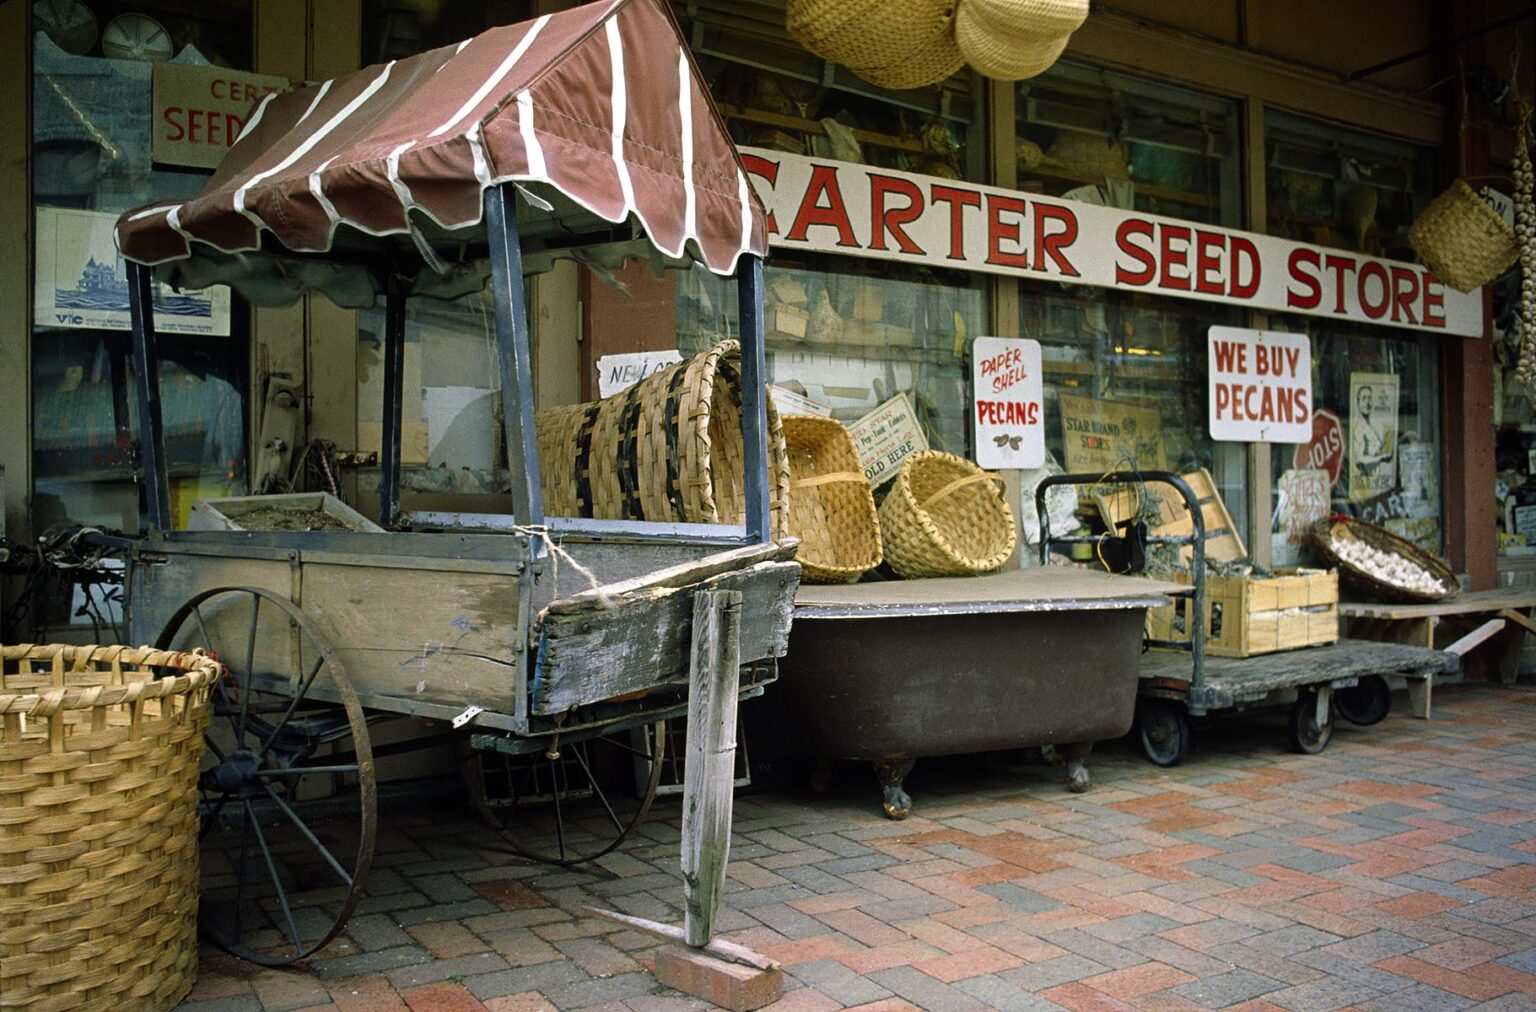 CARTER SEED STORE - MEMPHIS, TENNESSEE